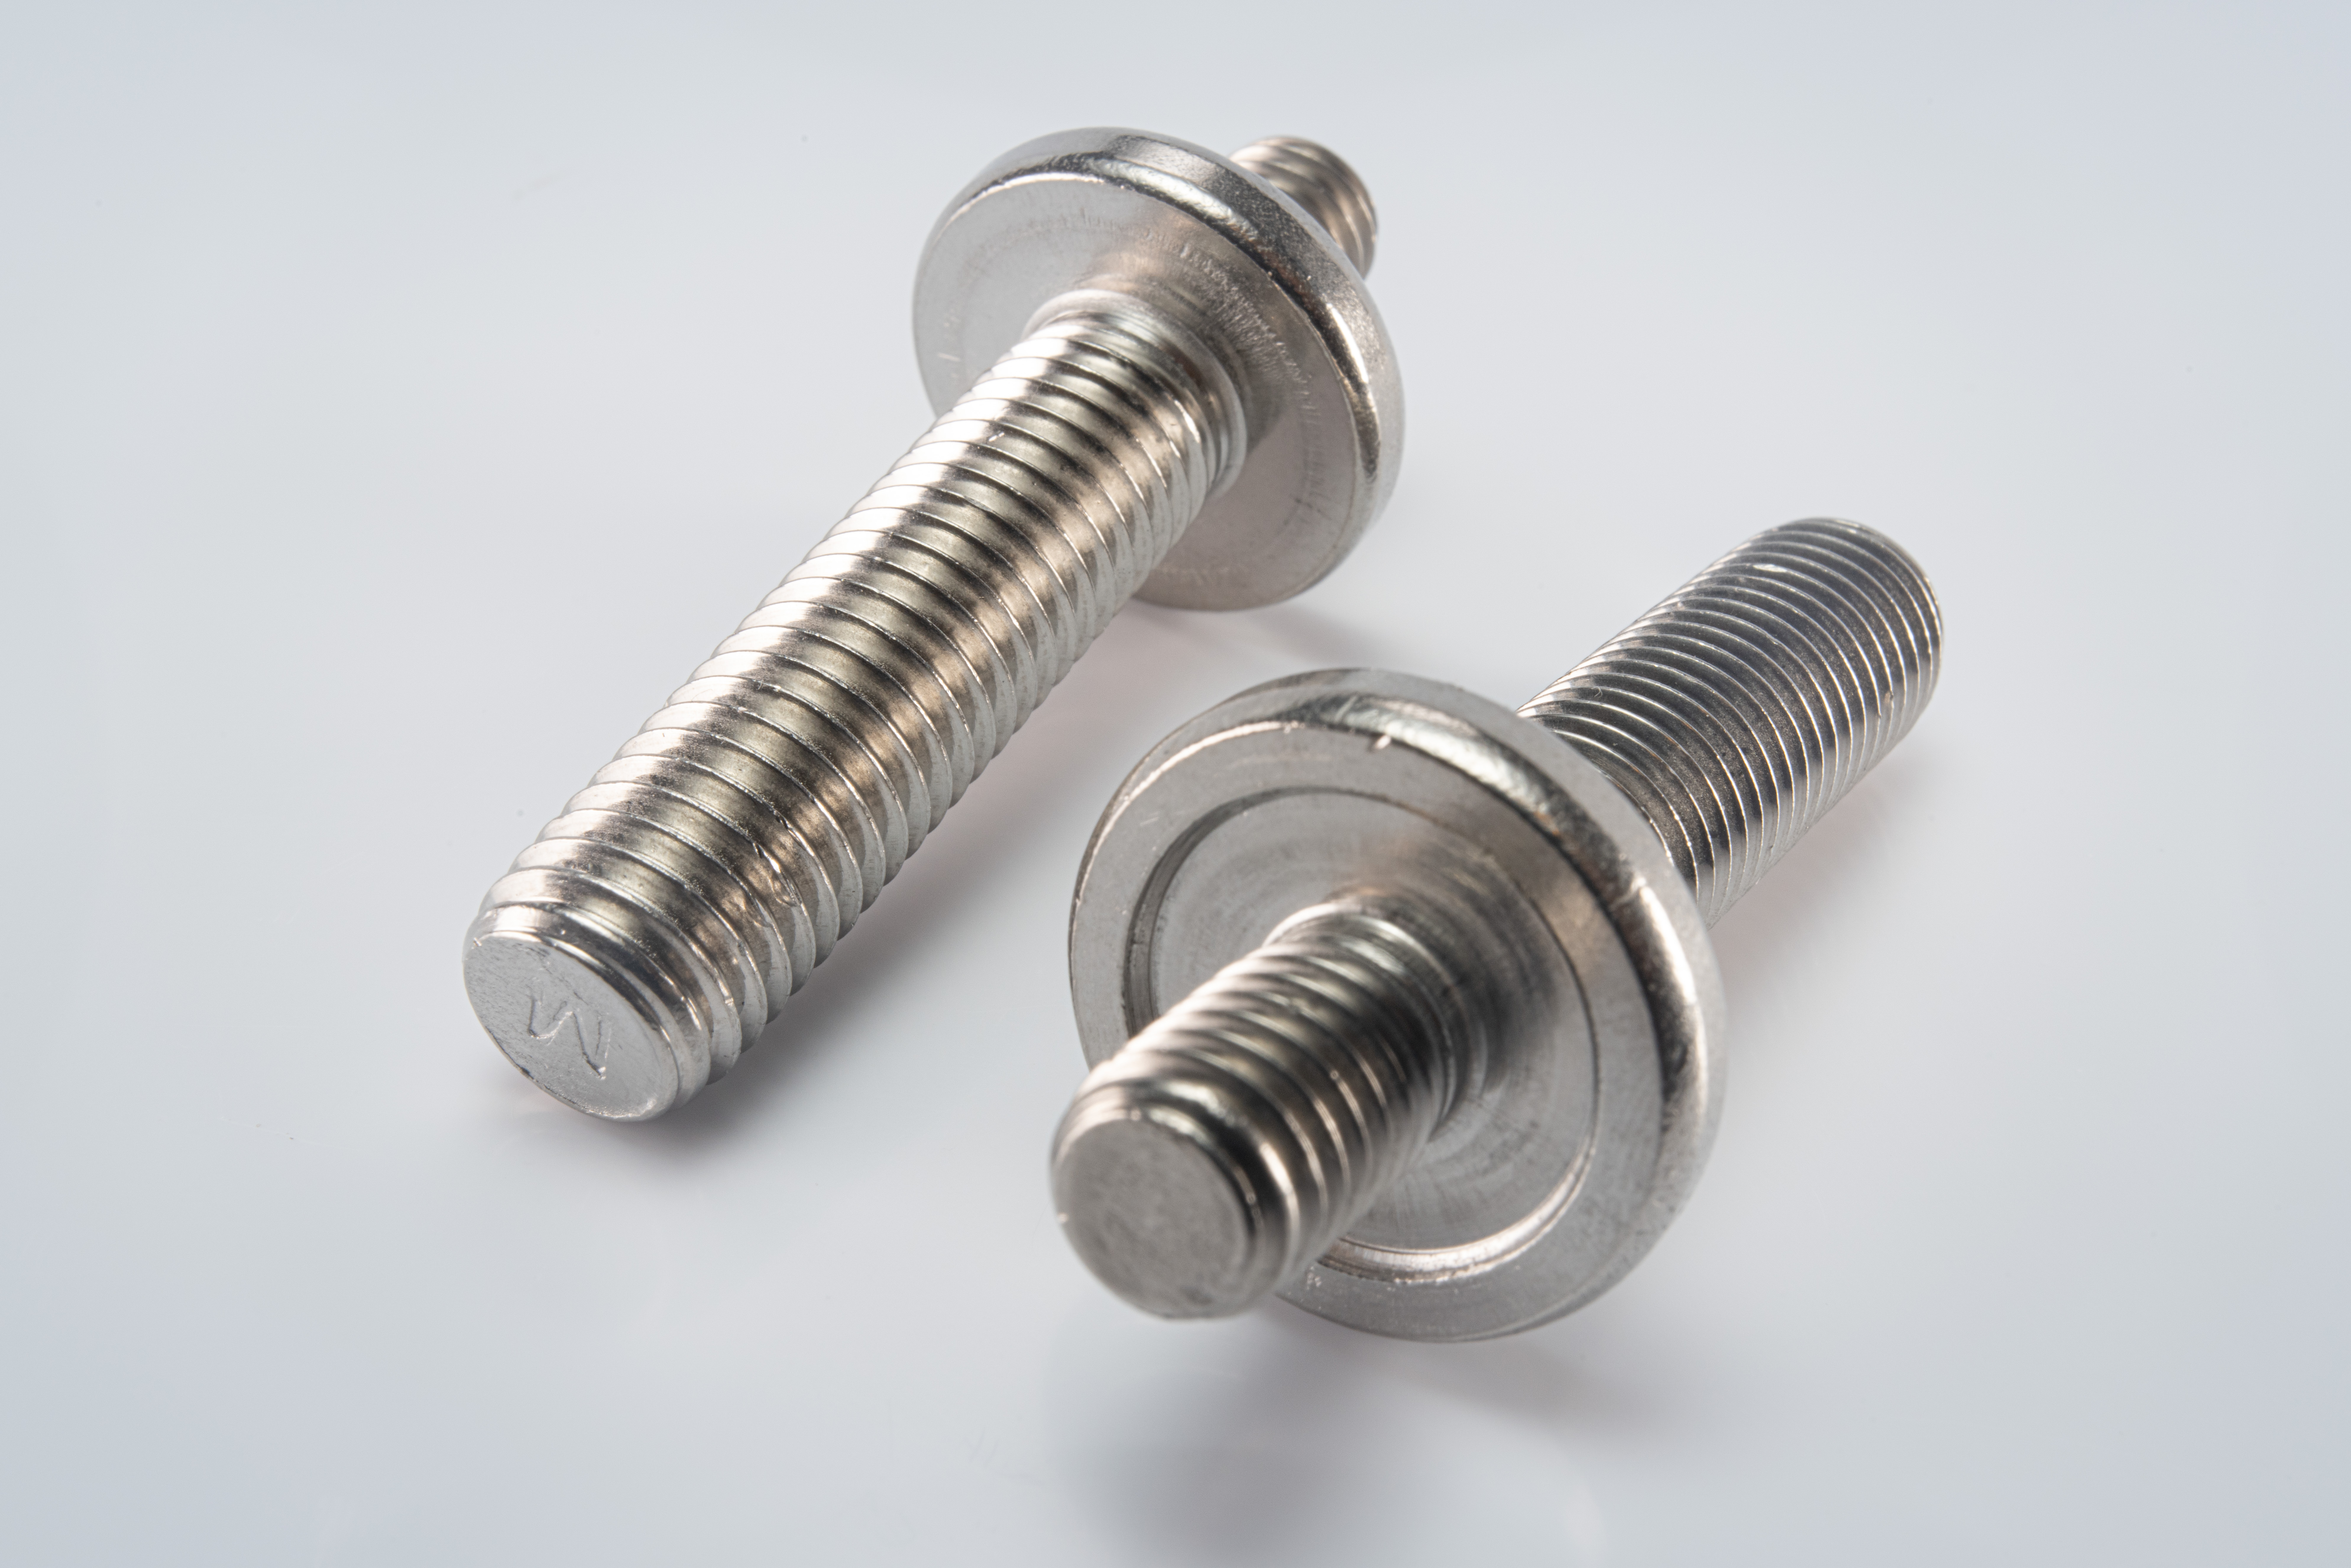 Long Stainless Double End Stud